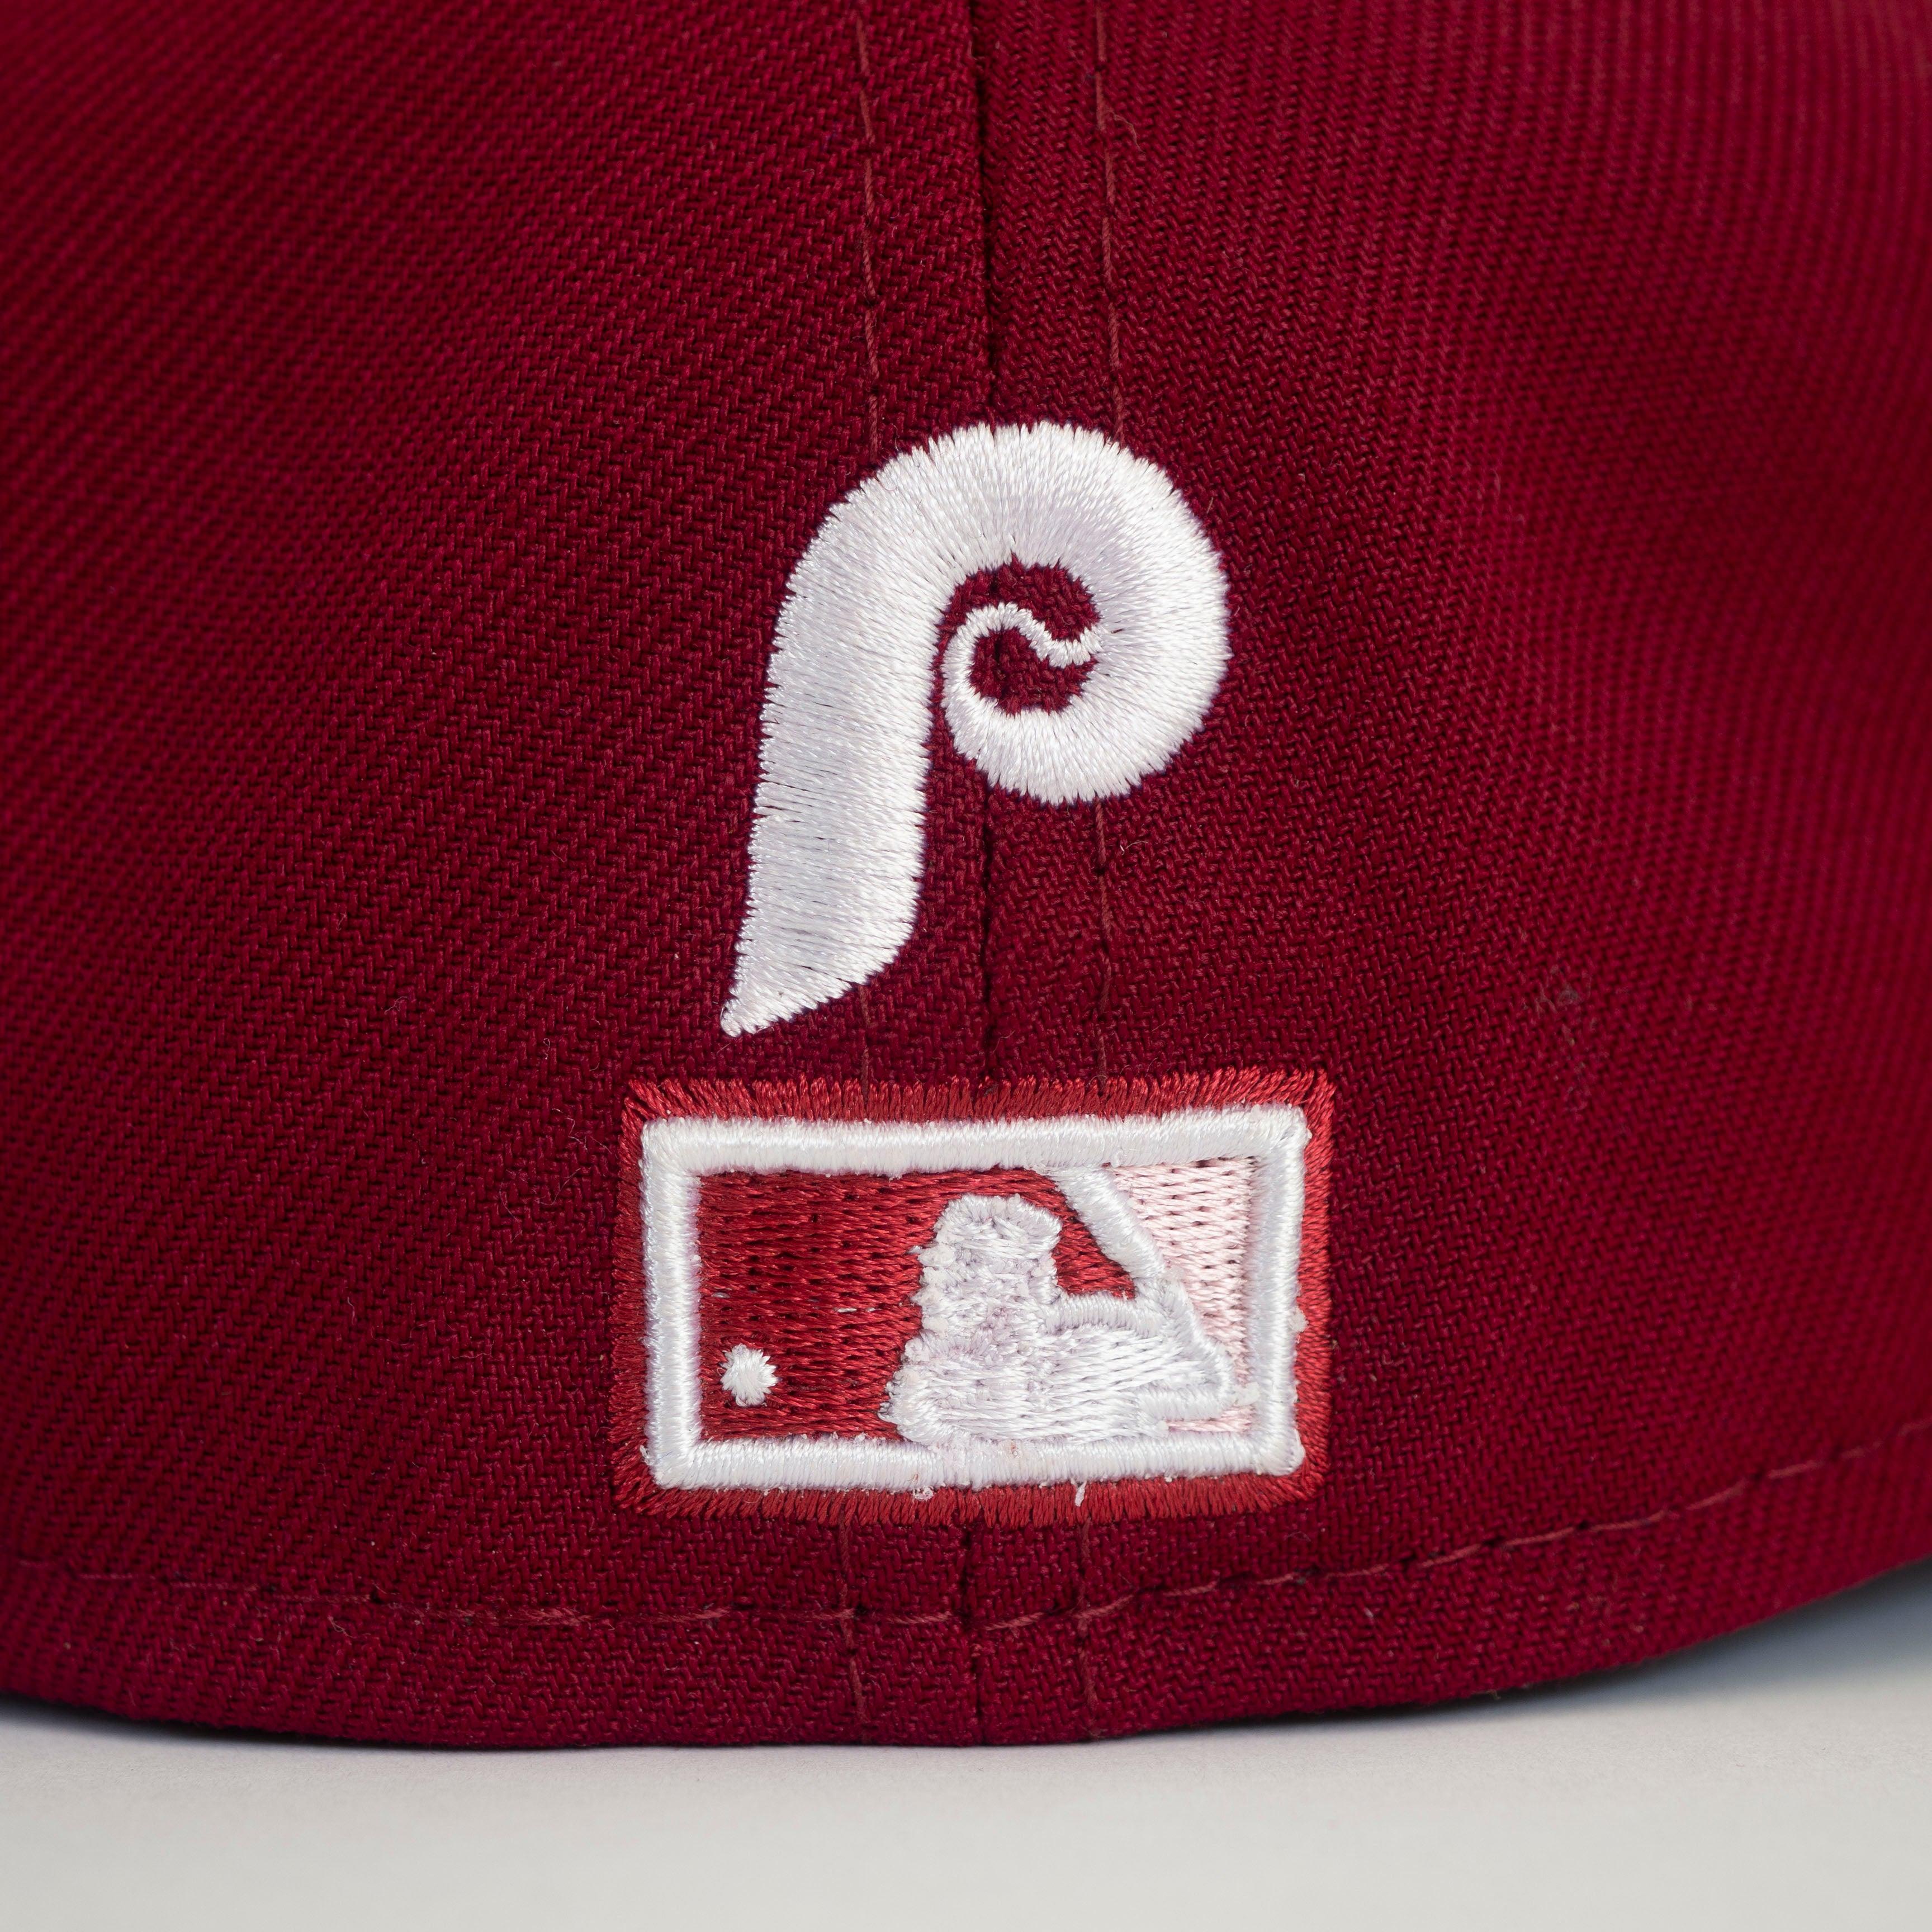 NEW ERA 59FIFTY MLB PHILADELPHIA PHILLIES SIDE PATCH BLOOM CARDINAL / PINK UV FITTED CAP - FAM